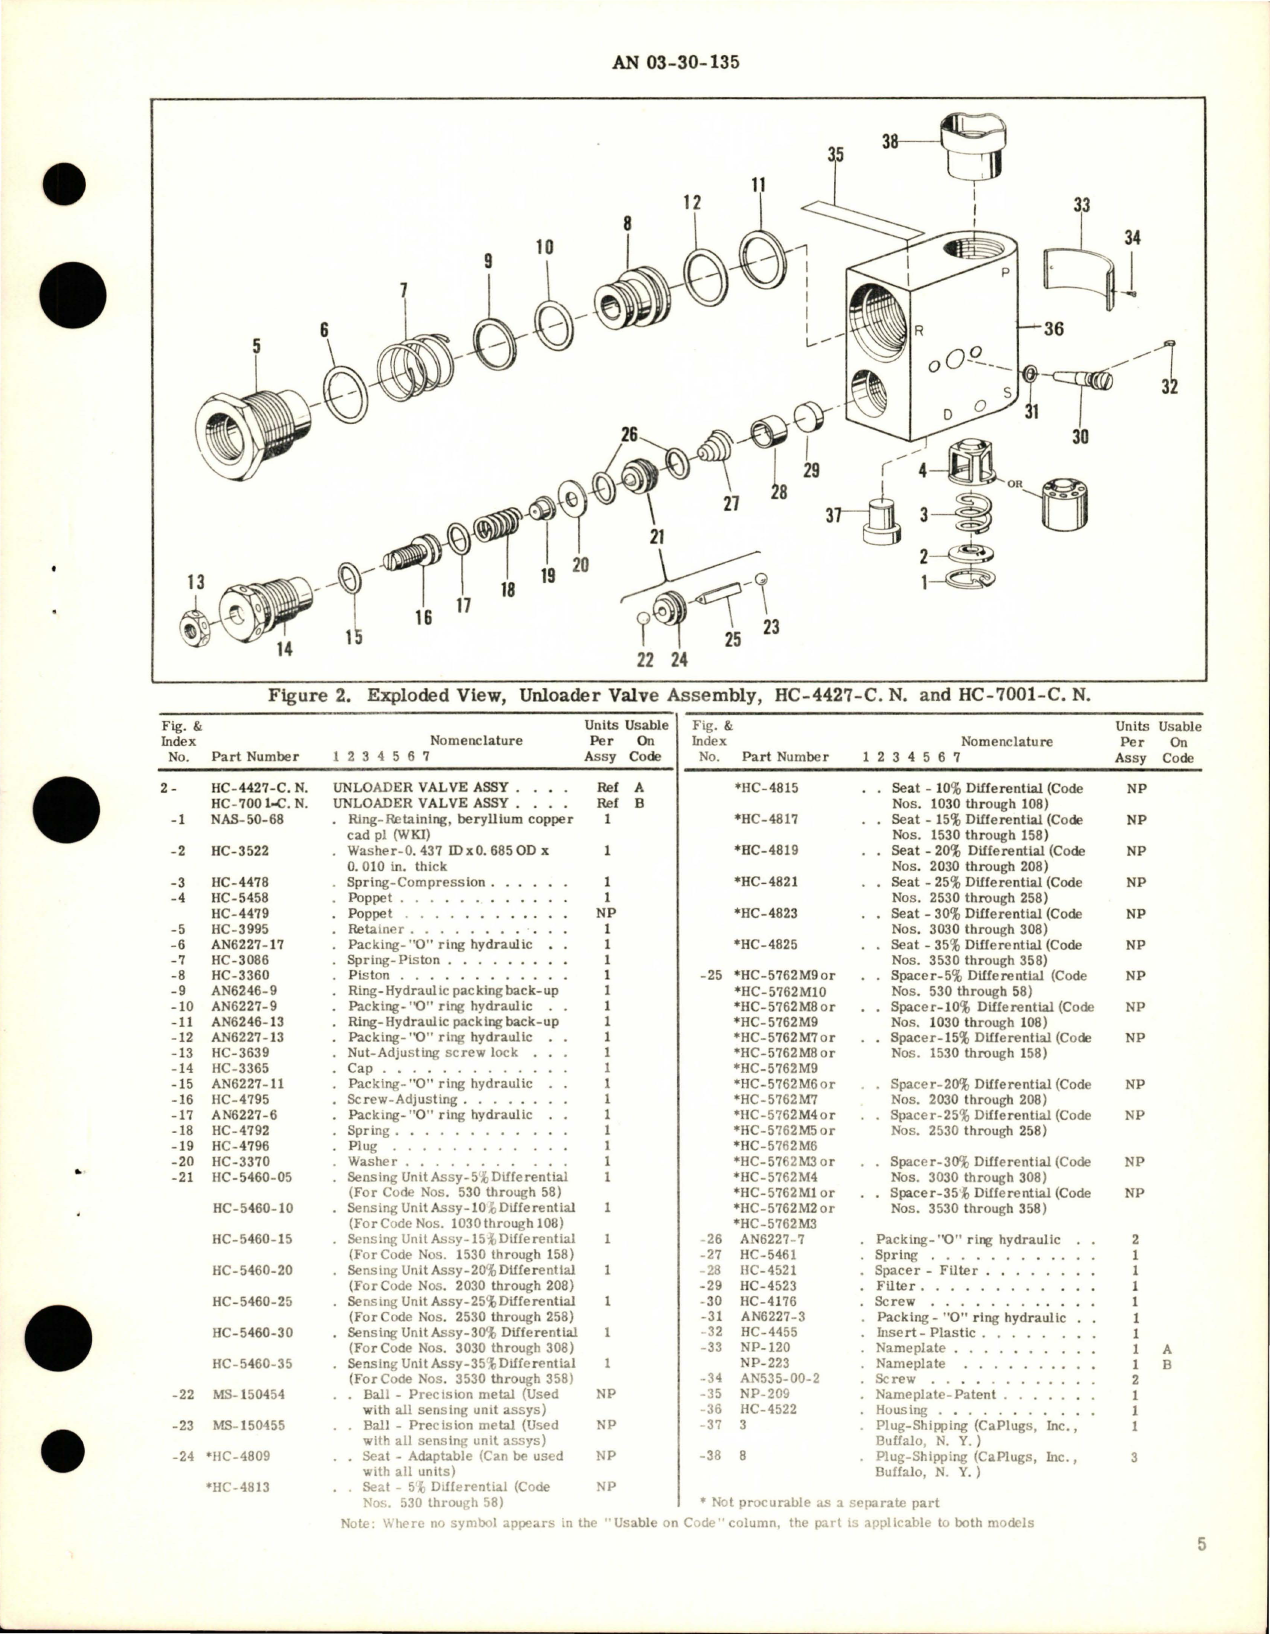 Sample page 5 from AirCorps Library document: Overhaul Instructions with Parts Breakdown for Unloader Valve Assembly - HC-4427-C.N. and HC-7001-C.N.